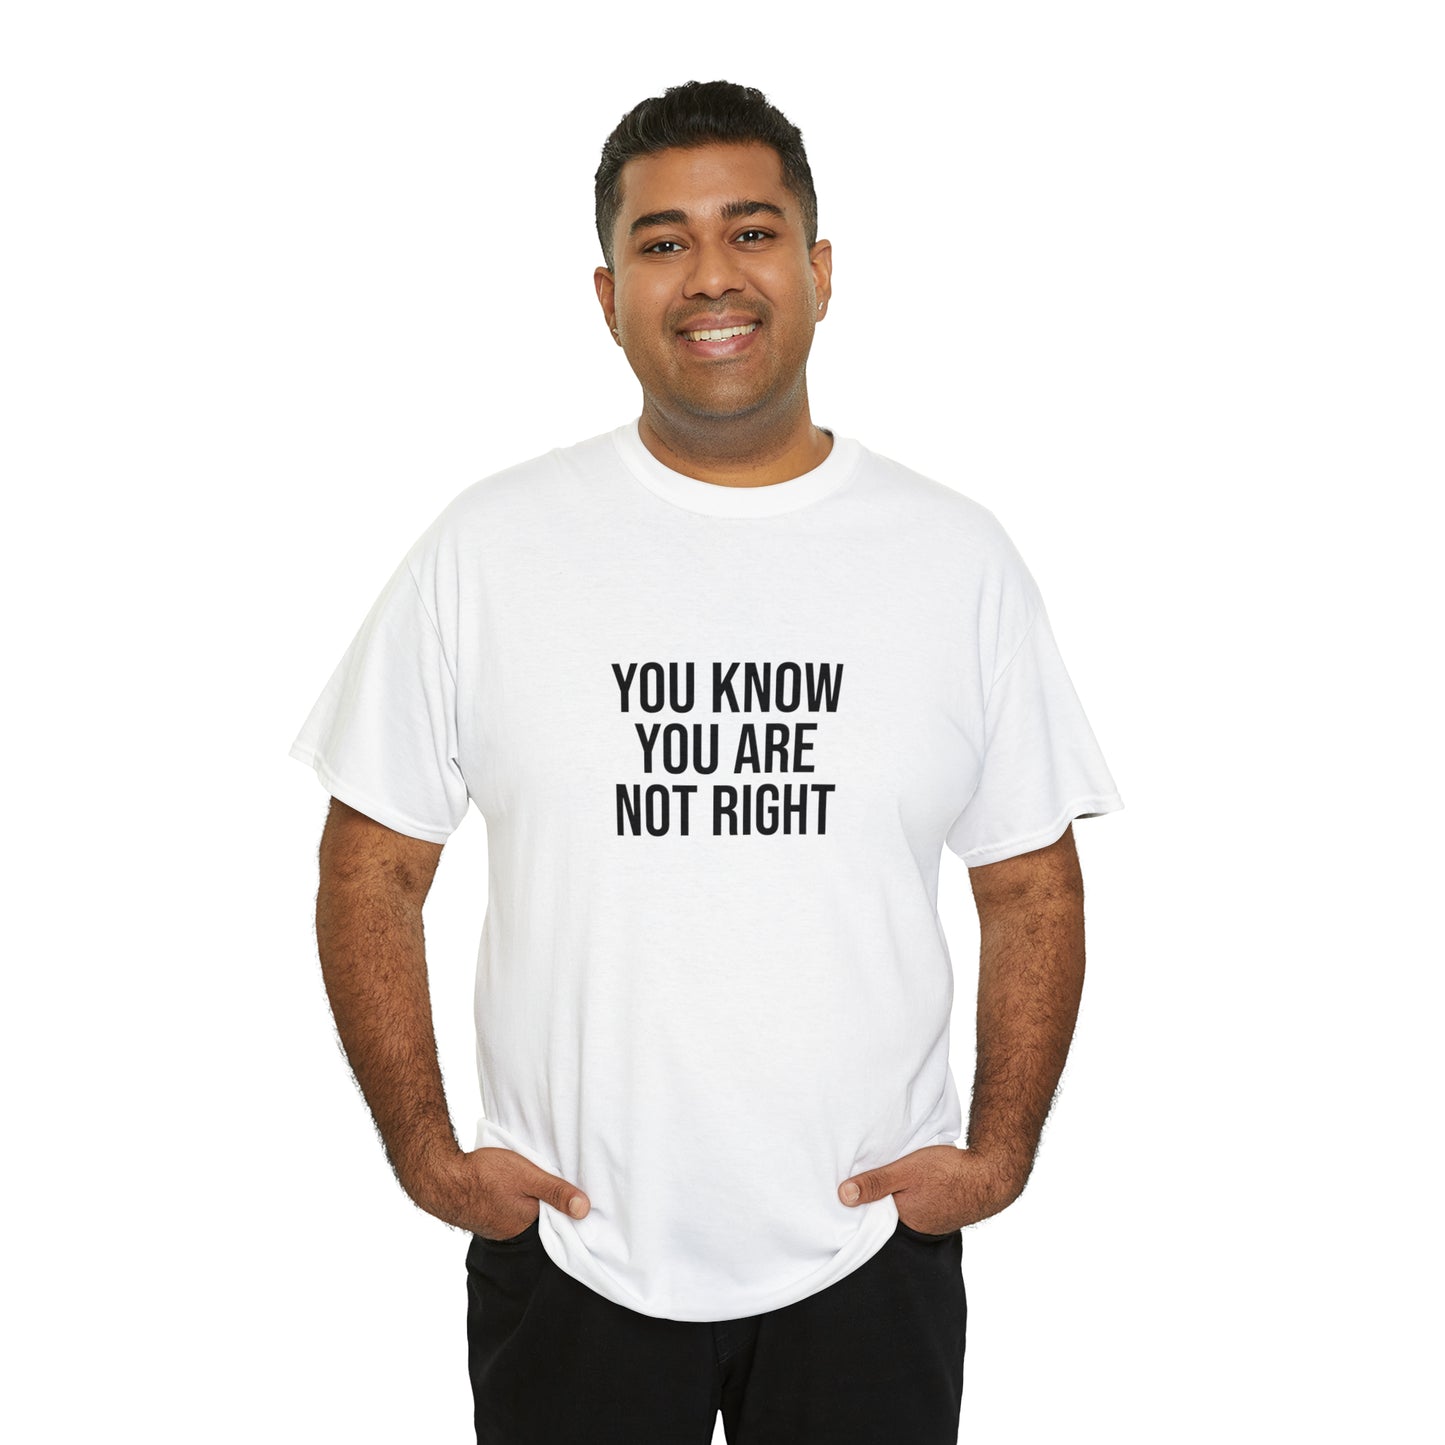 YOU'RE NOT RIGHT T-SHIRT